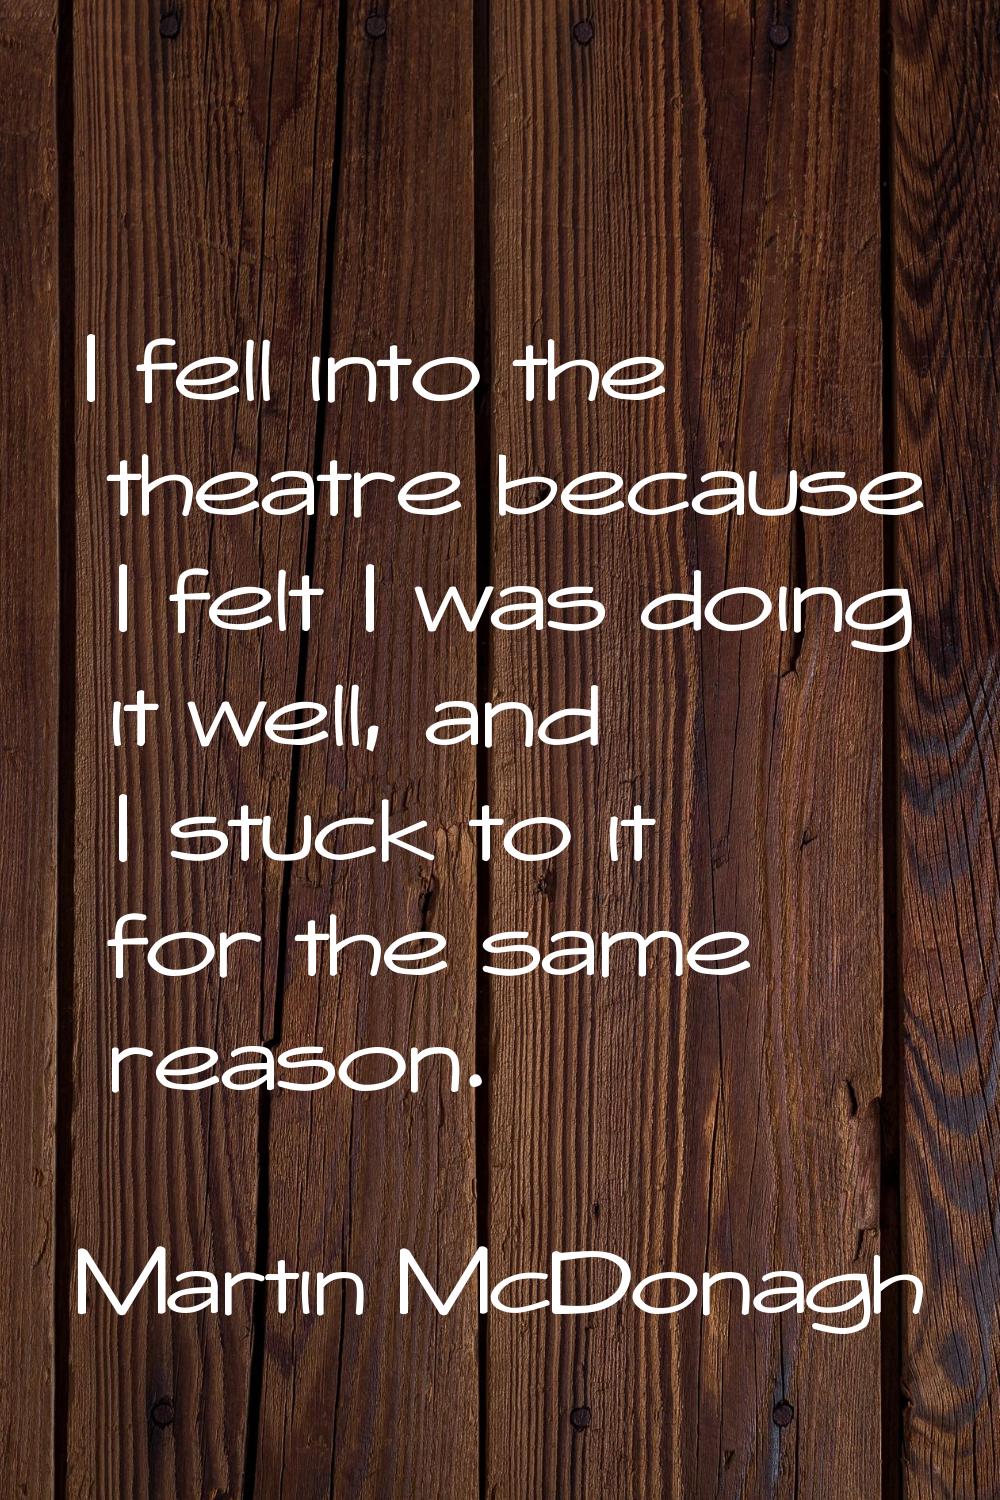 I fell into the theatre because I felt I was doing it well, and I stuck to it for the same reason.